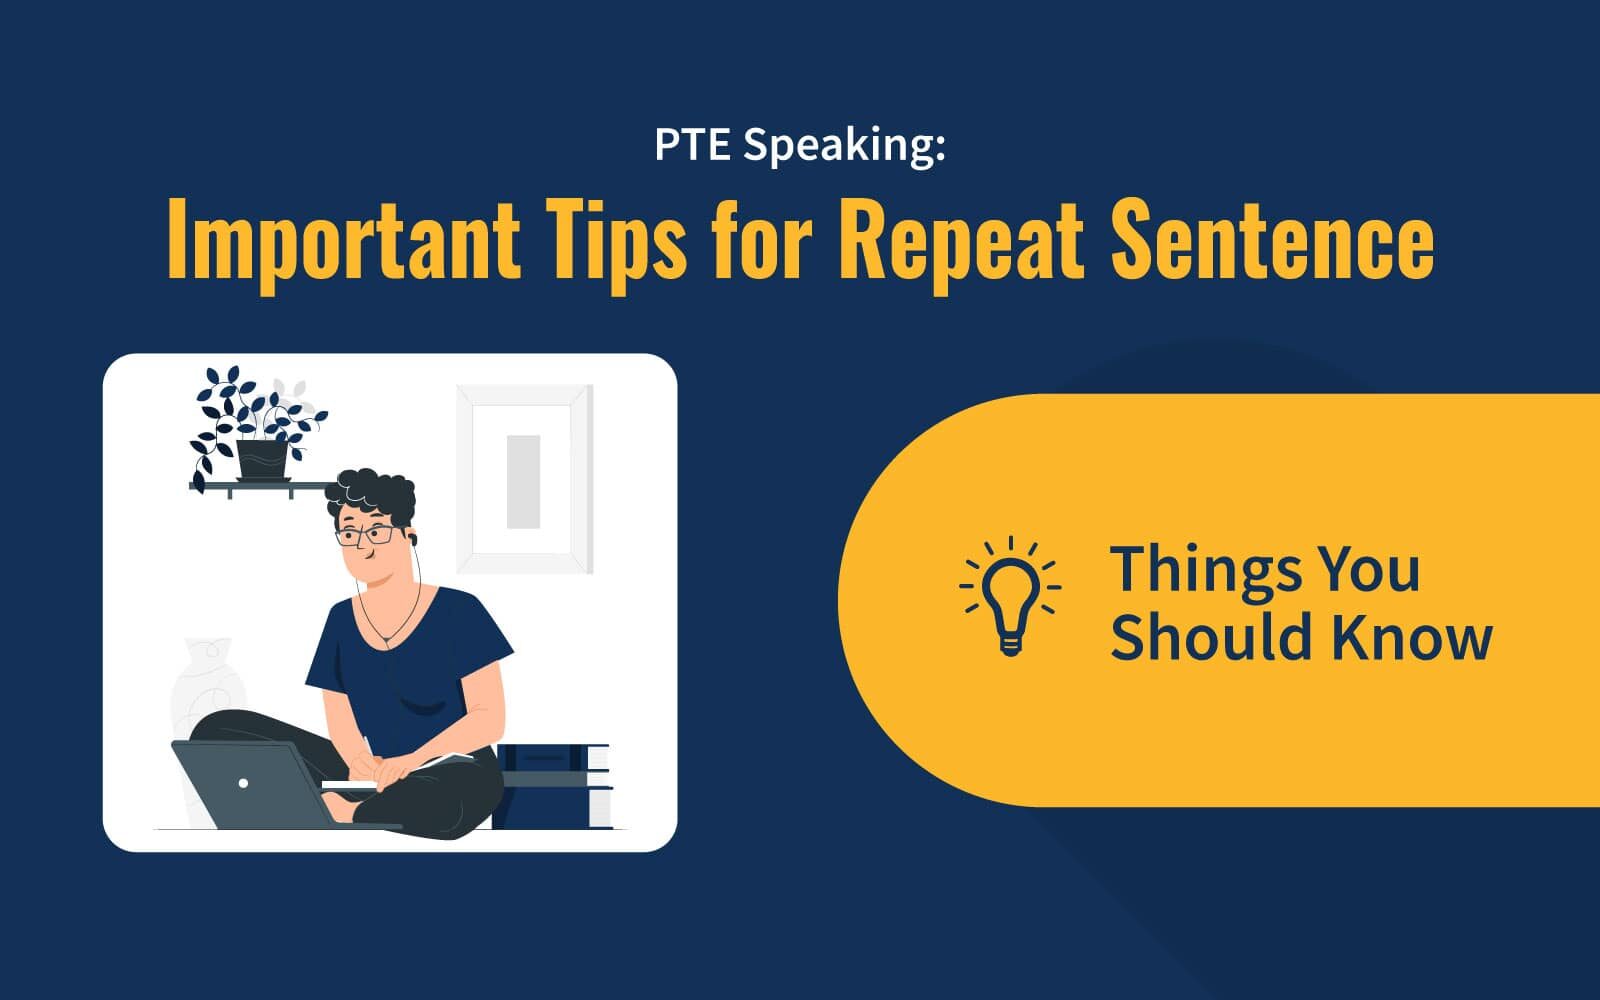 PTE Speaking: Important Tips for Repeat Sentence image